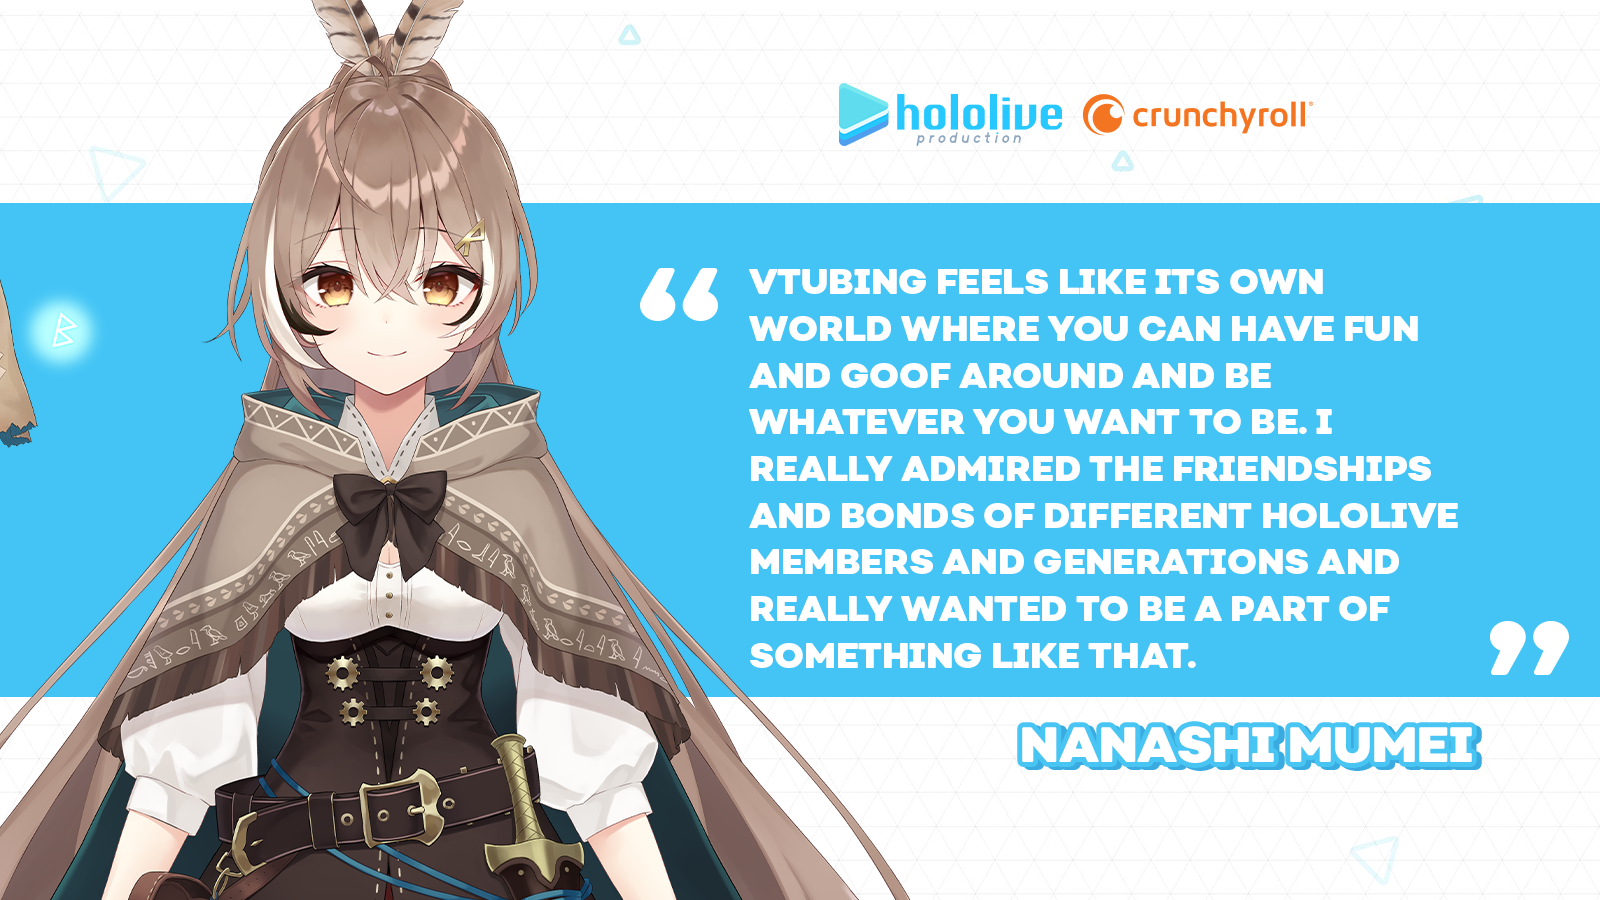 #INTERVIEW: hololive's Nanashi Mumei Has Seen All Of Human Civilization Lead To VTubing